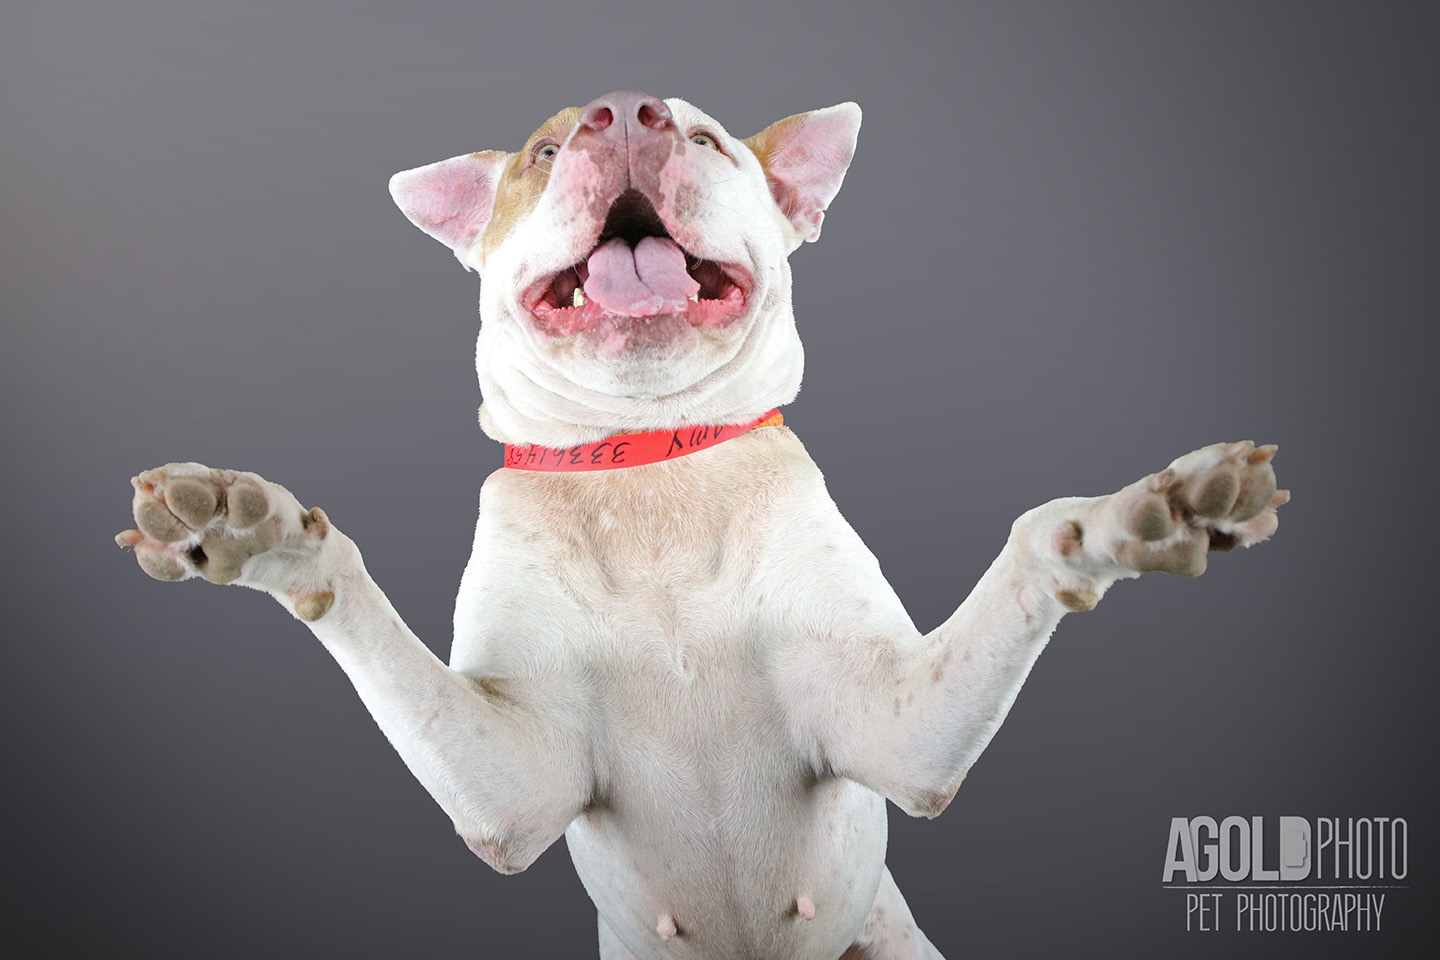 amy_agoldphoto-tampa-pet-photography__agoldphoto-tampa-pet-photography_